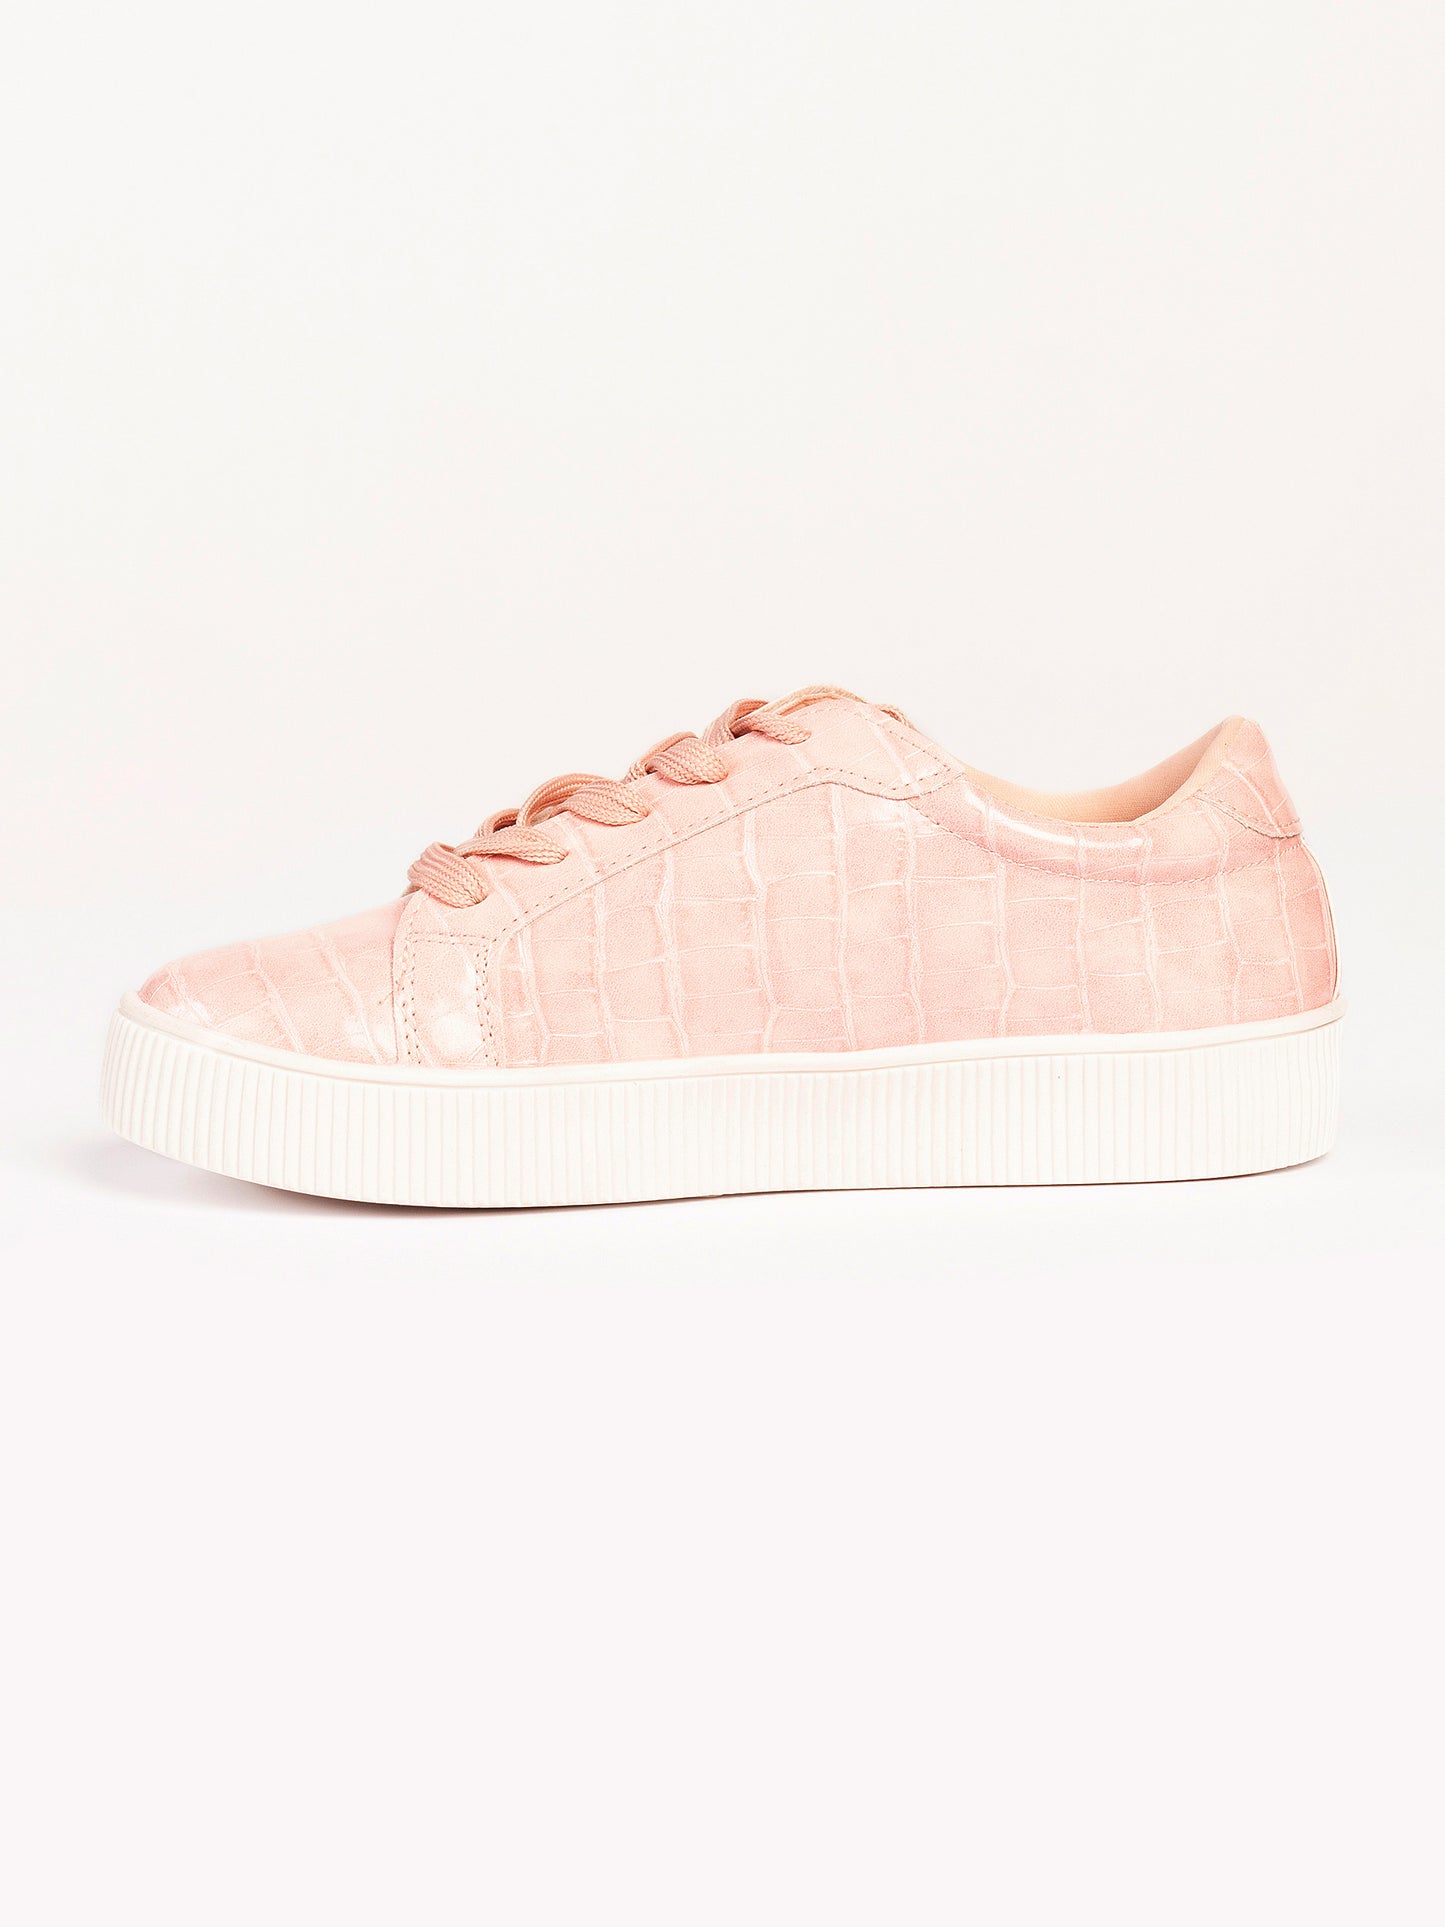 Glossy Textured Sneakers